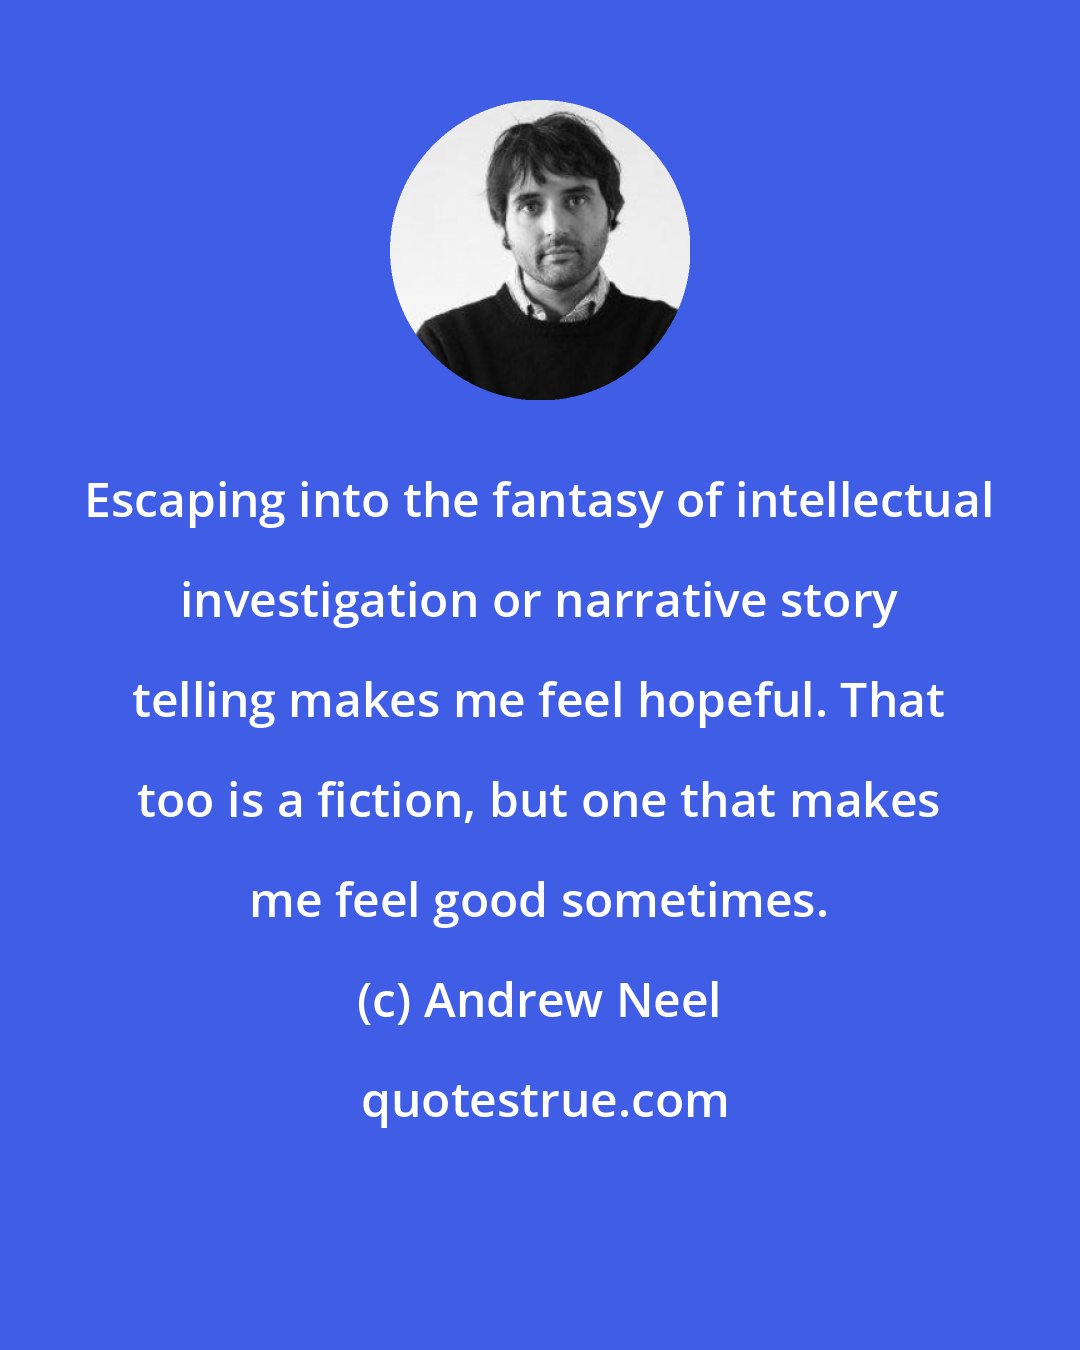 Andrew Neel: Escaping into the fantasy of intellectual investigation or narrative story telling makes me feel hopeful. That too is a fiction, but one that makes me feel good sometimes.